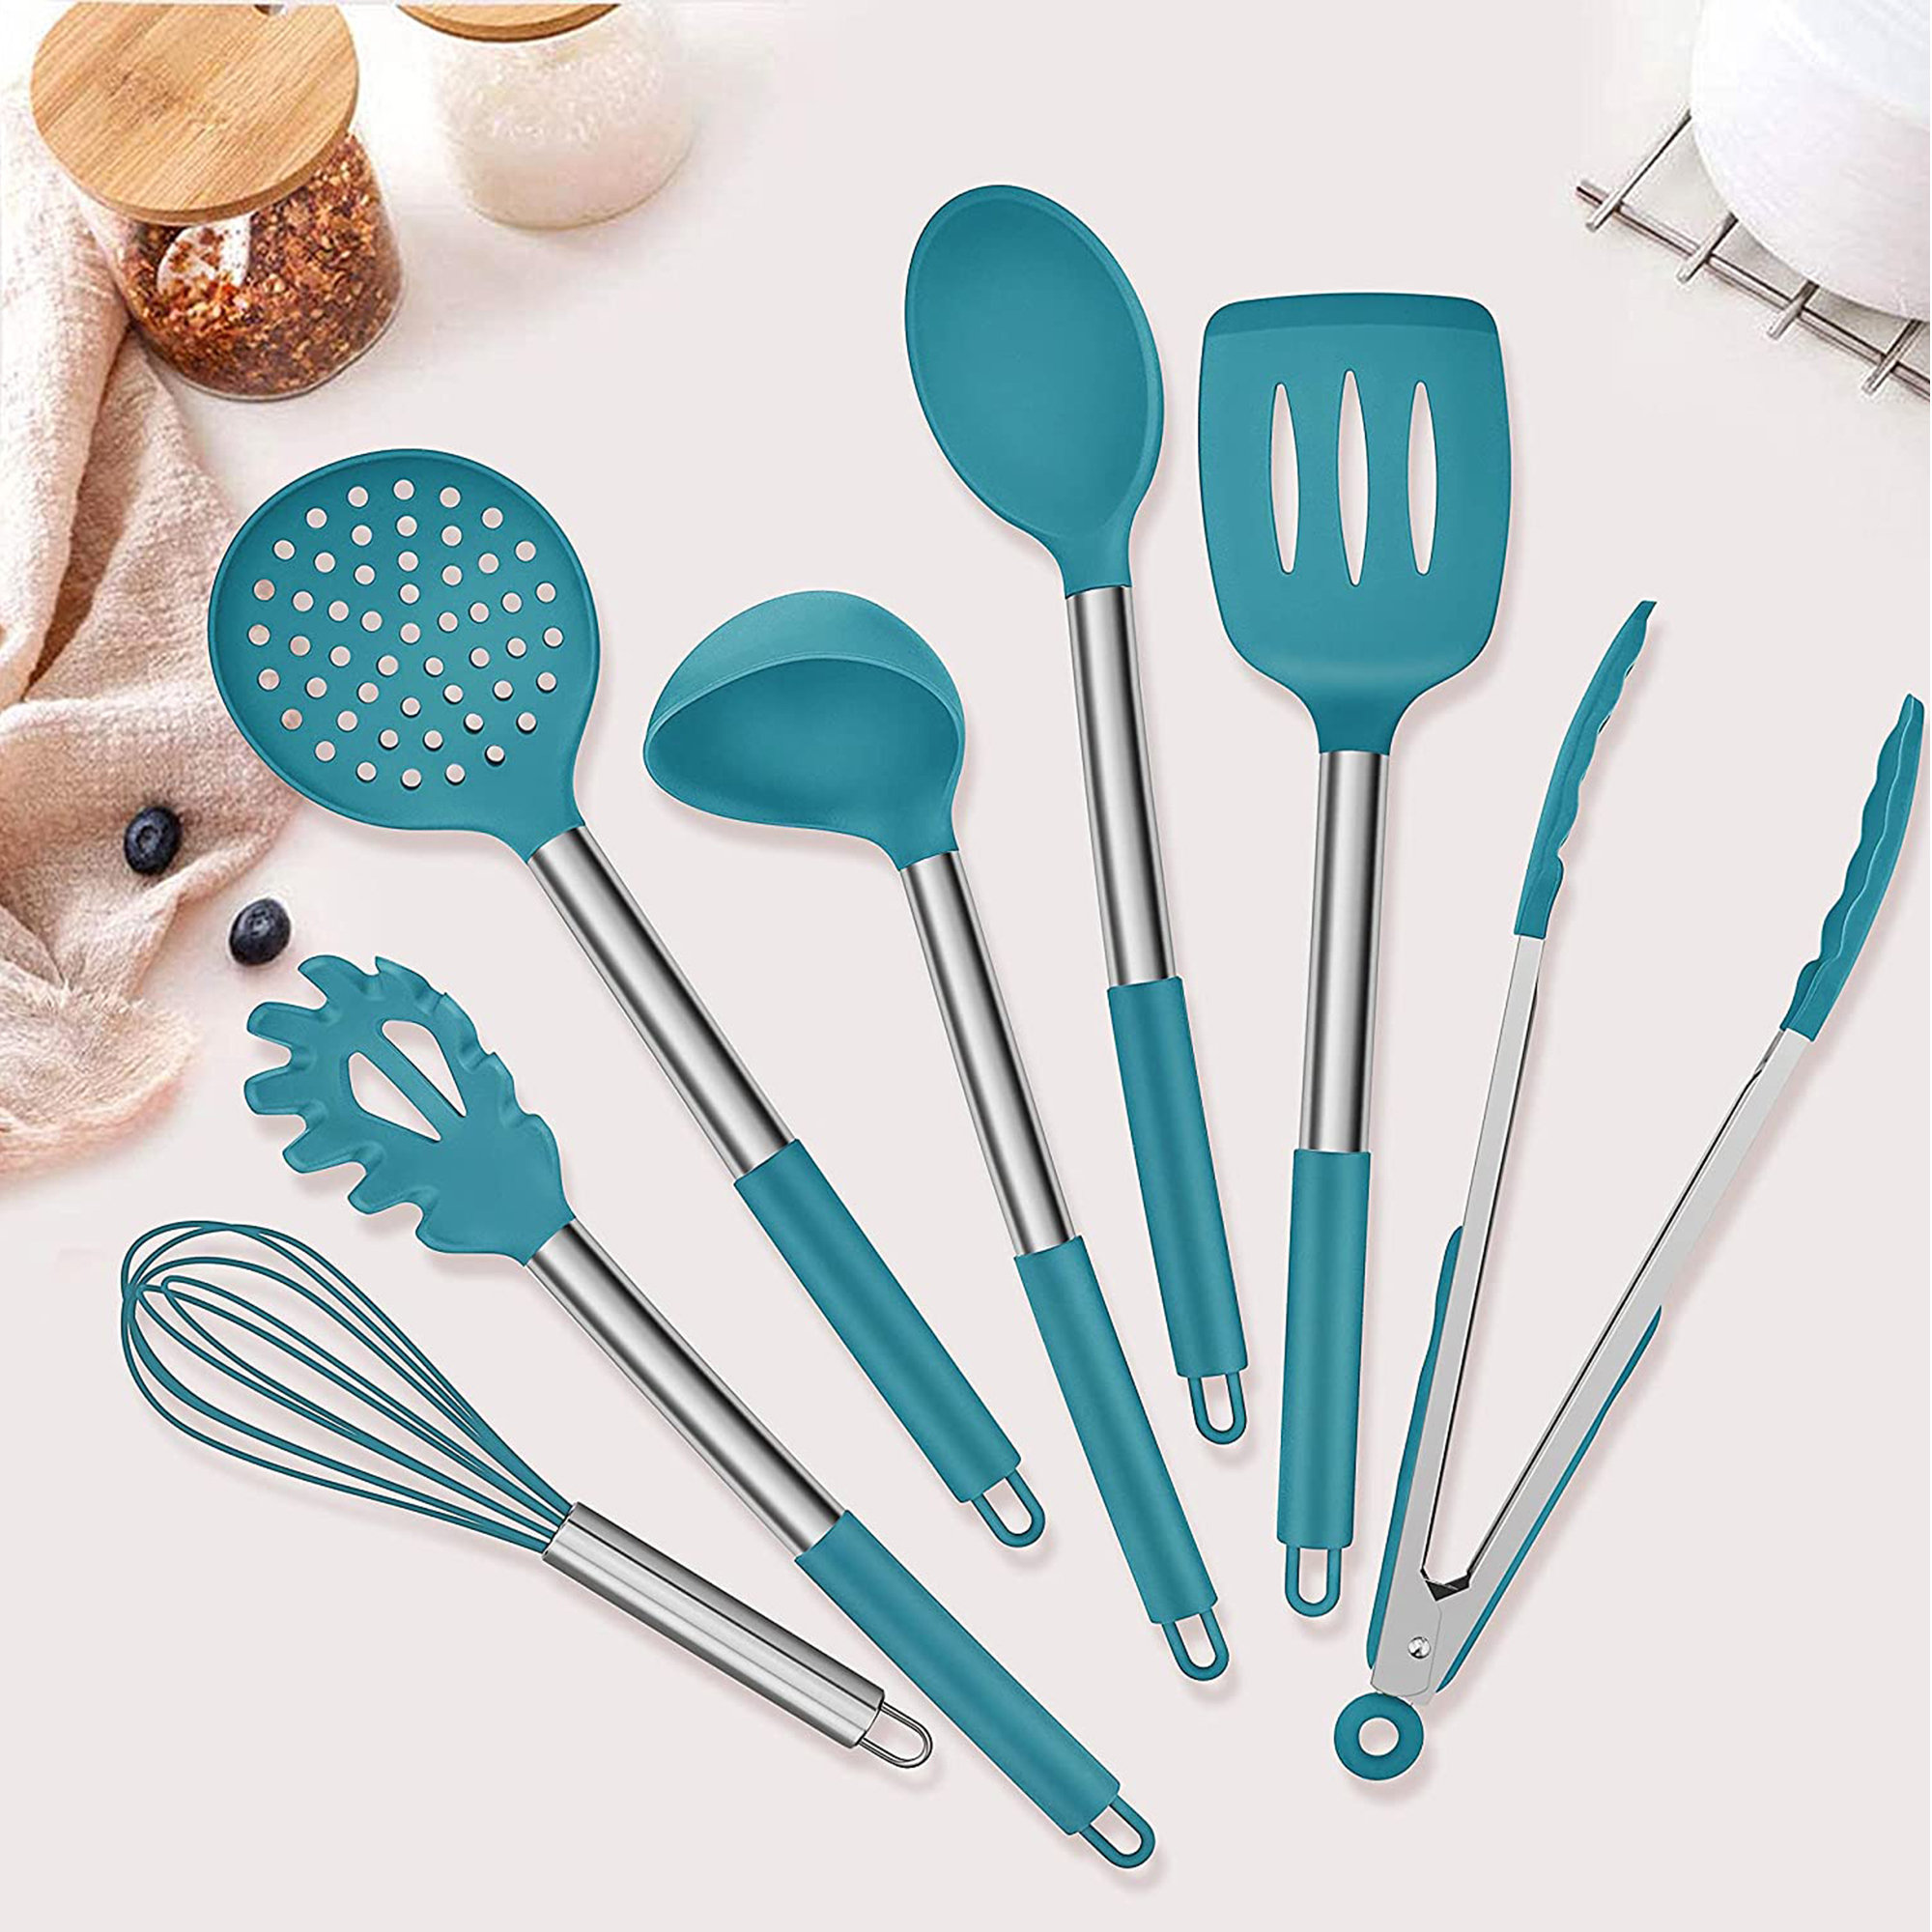 14 Pcs Silicone Cooking Utensils Kitchen Utensil Set - 446f Heat  Resistant,turner Tongs, Spatula, Spoon, Brush, Whisk, Wooden Handle Gray  Kitchen Gadg